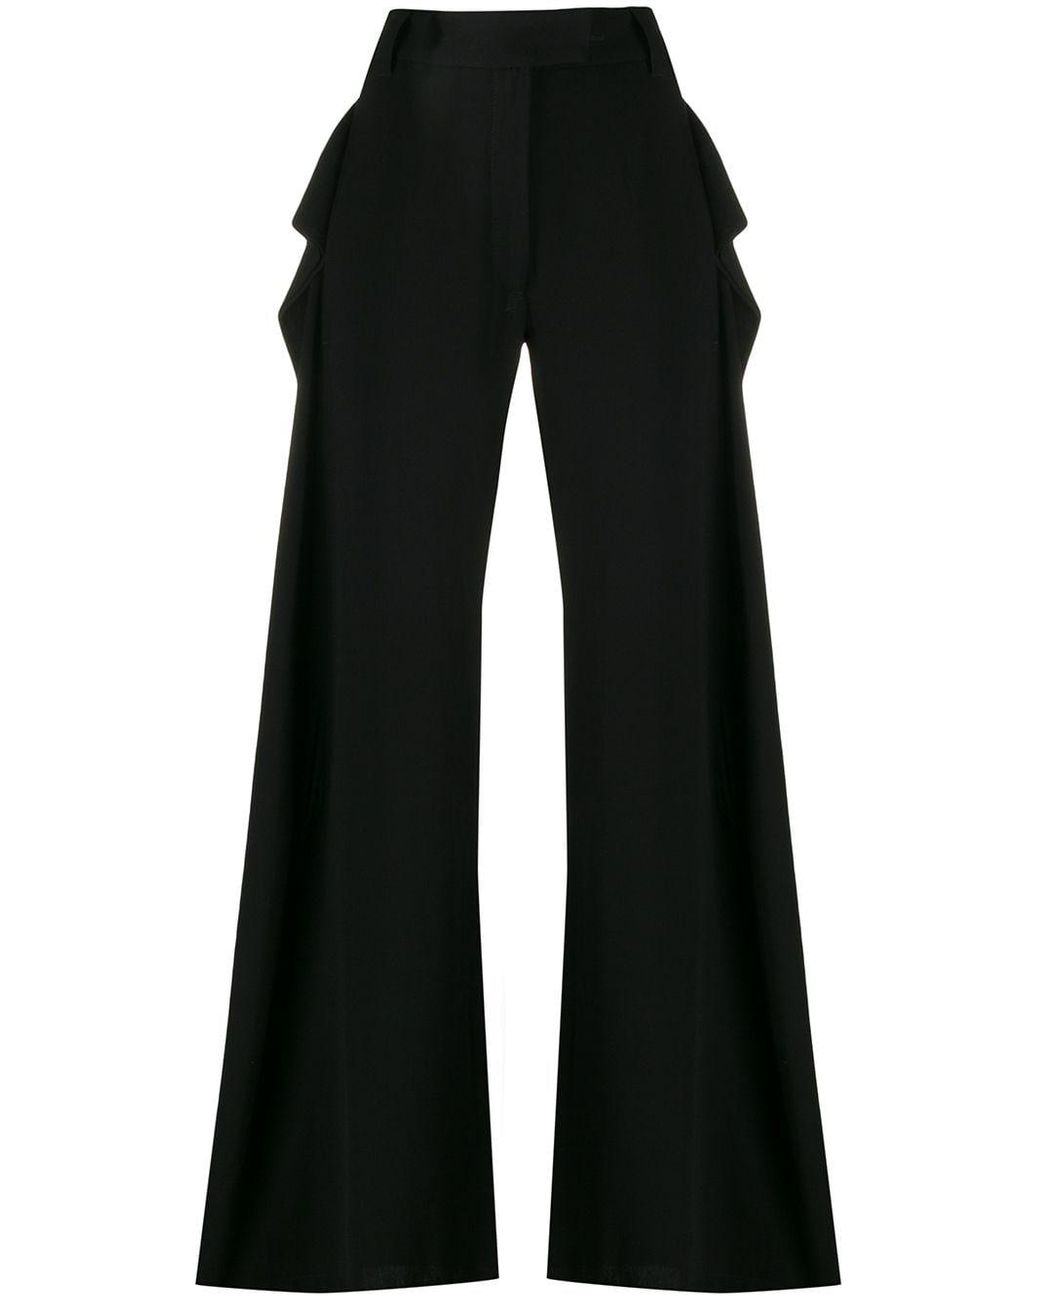 Ann Demeulemeester Wool Extra Long Palazzo Trousers in Black - Lyst